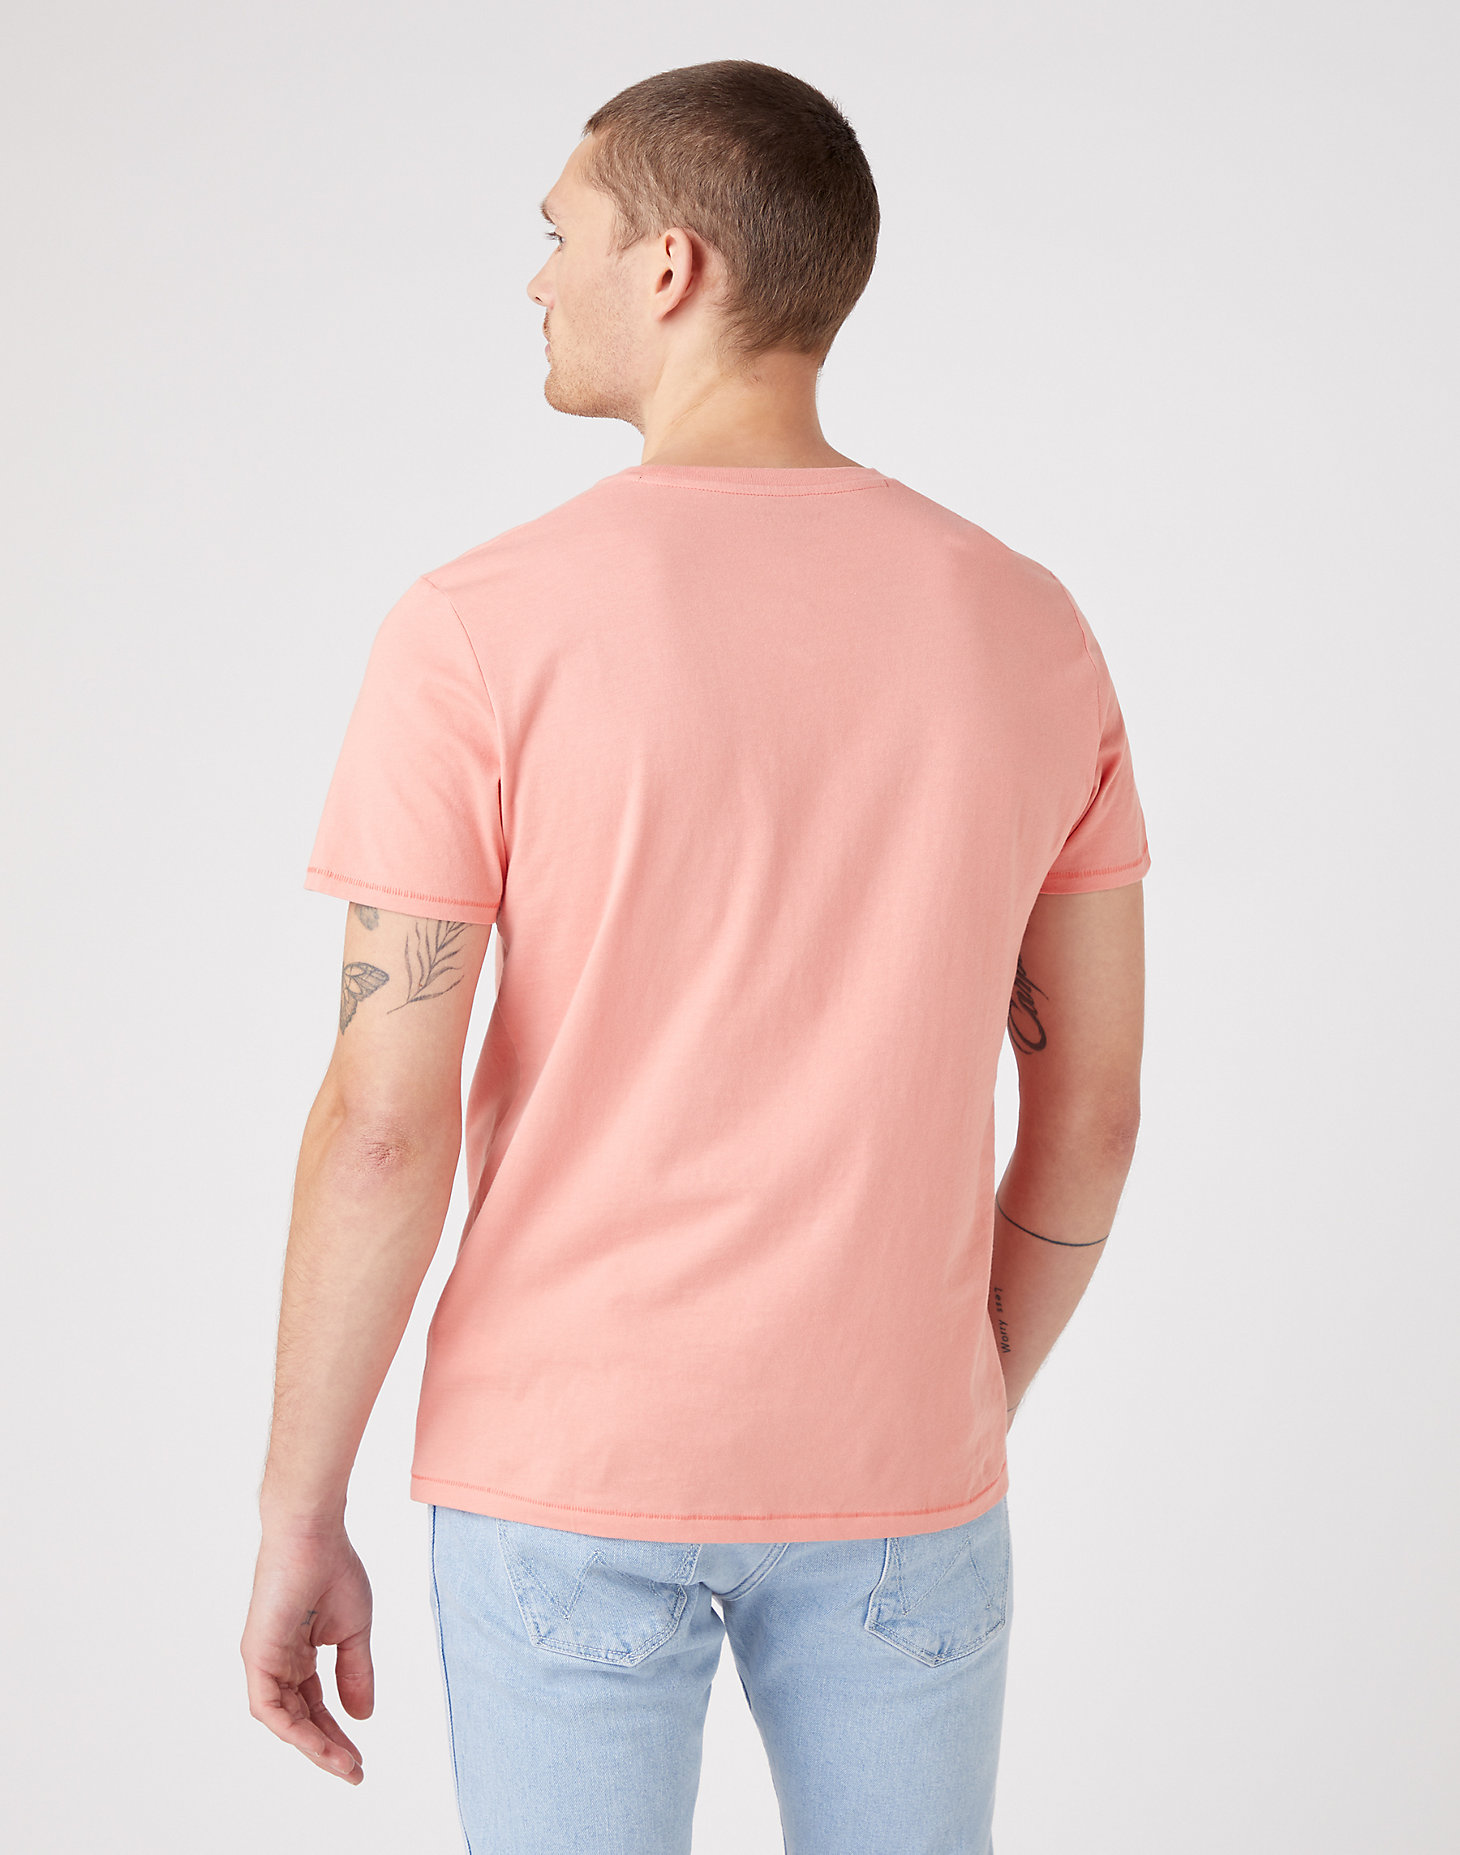 Sign Off Tee in Spiced Coral alternative view 2